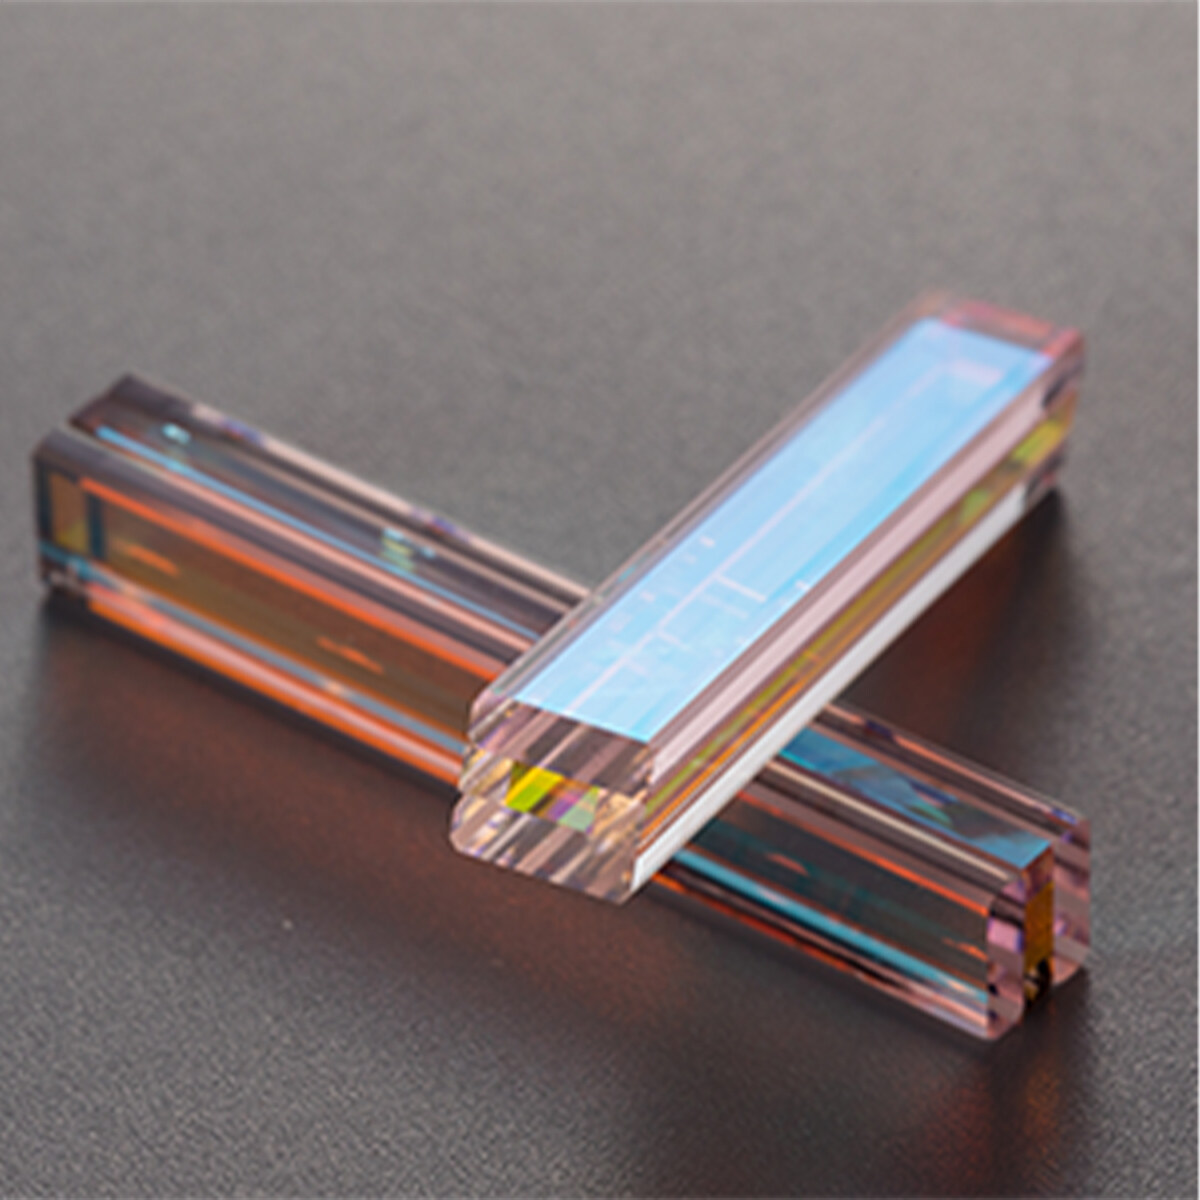 wedge prism manufacturers, China wedge prism, optical glass manufacturers